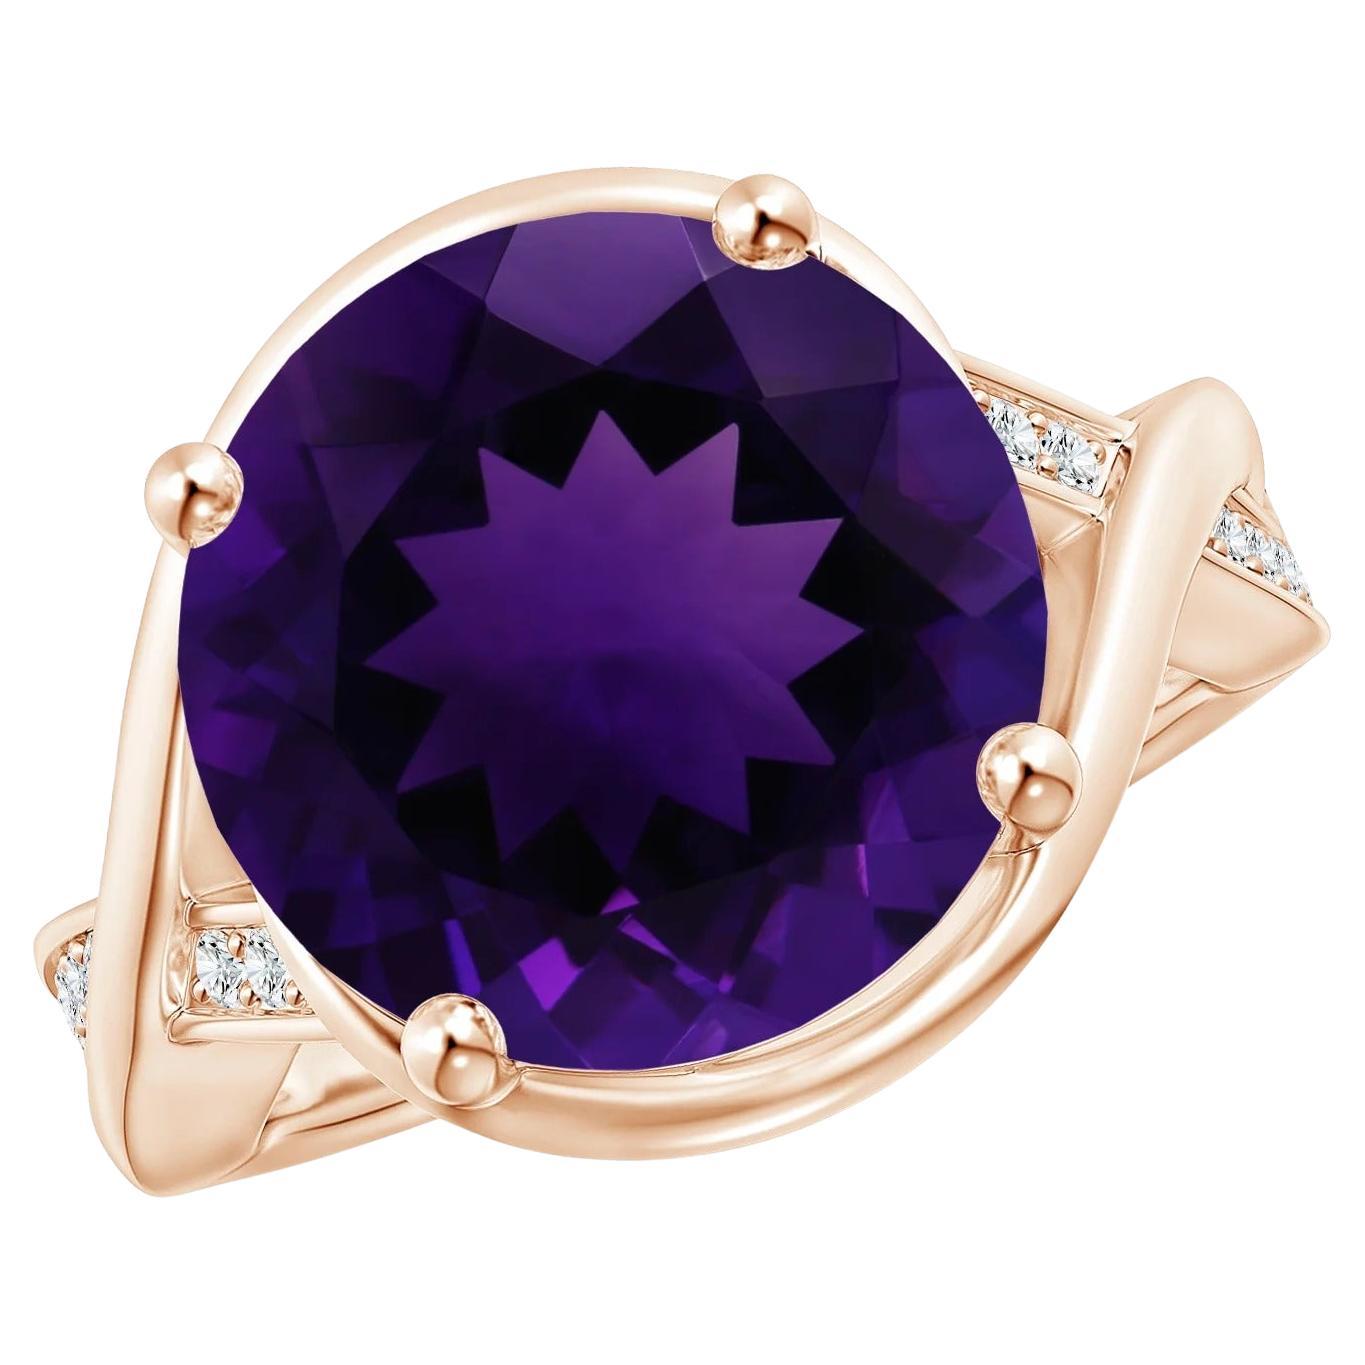 For Sale:  GIA Certified Natural Amethyst Bypass Engagement Ring in Rose Gold